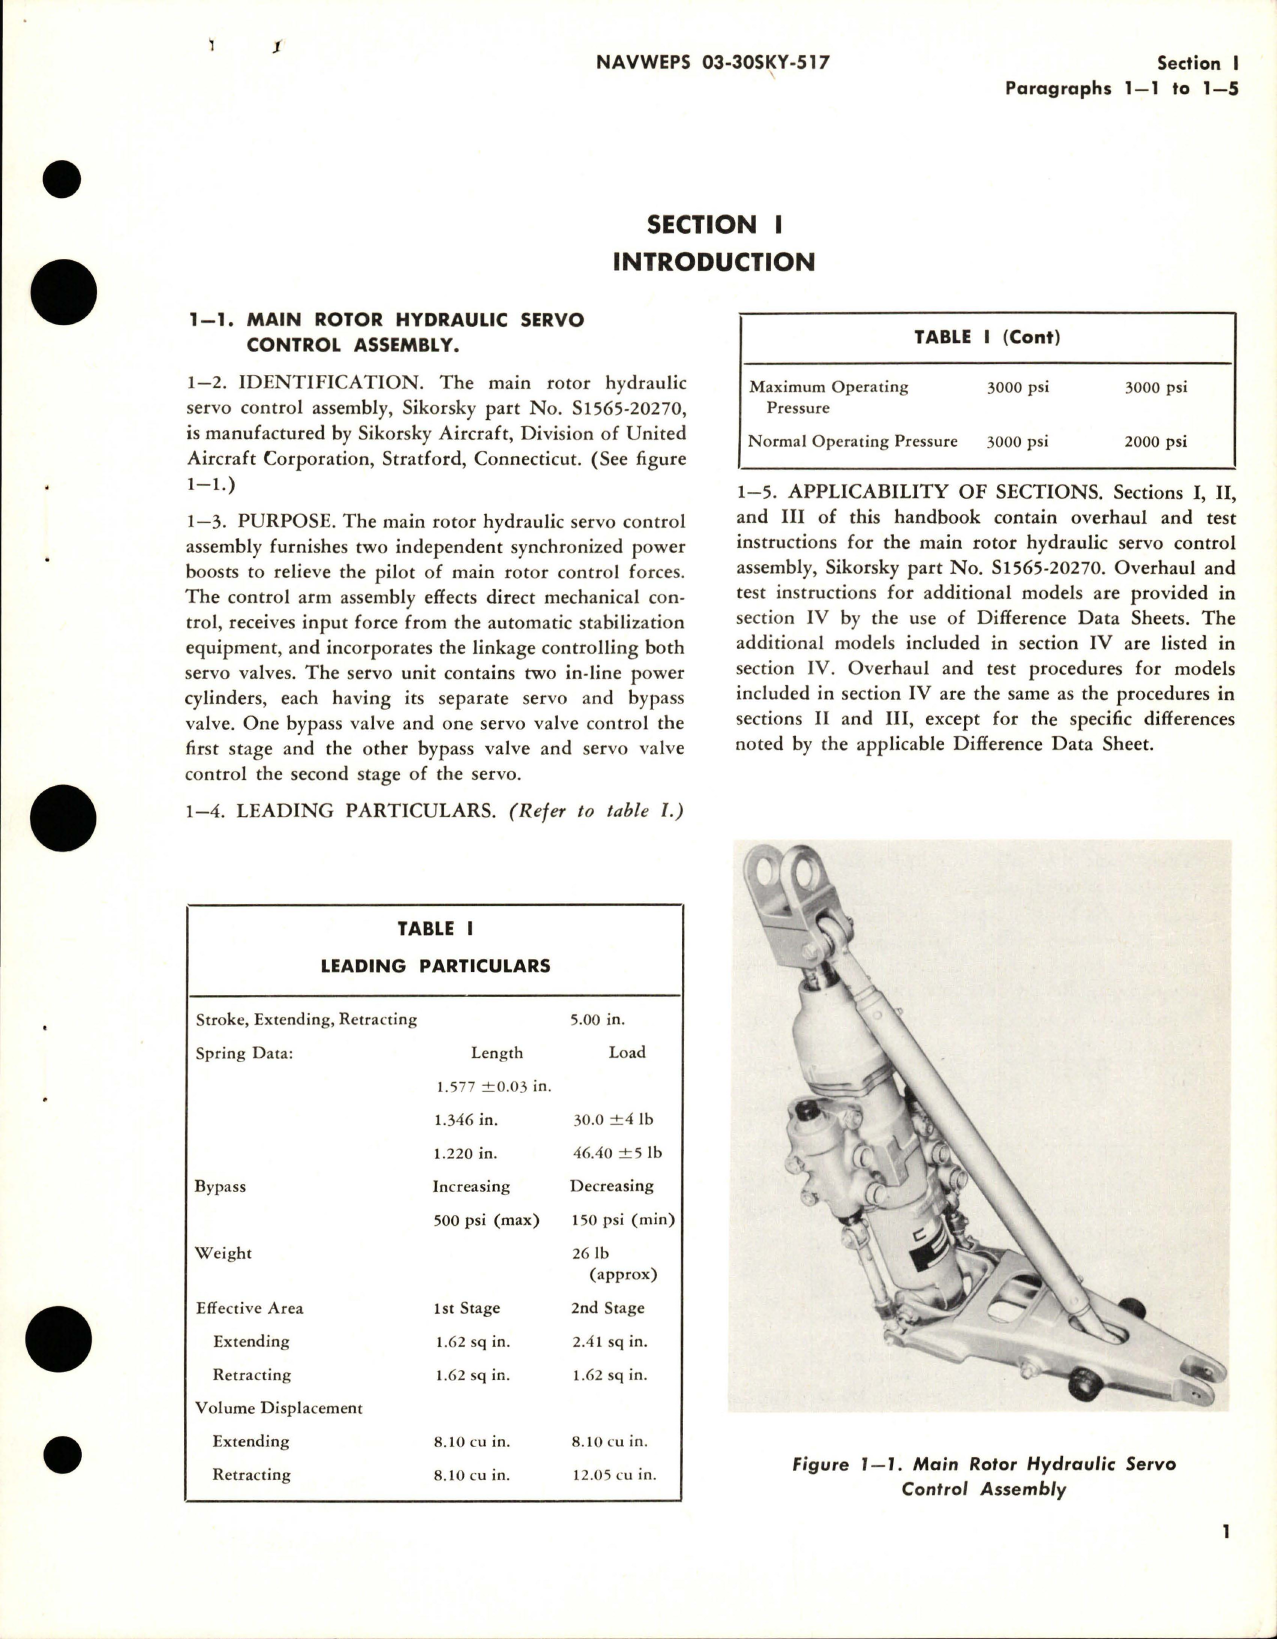 Sample page 5 from AirCorps Library document: Overhaul Instructions for Main Rotor Hydraulic Servo Control Assembly - Parts S1565-20270, S1565-20270-2, S1565-20270-4, and S1565-20270-6